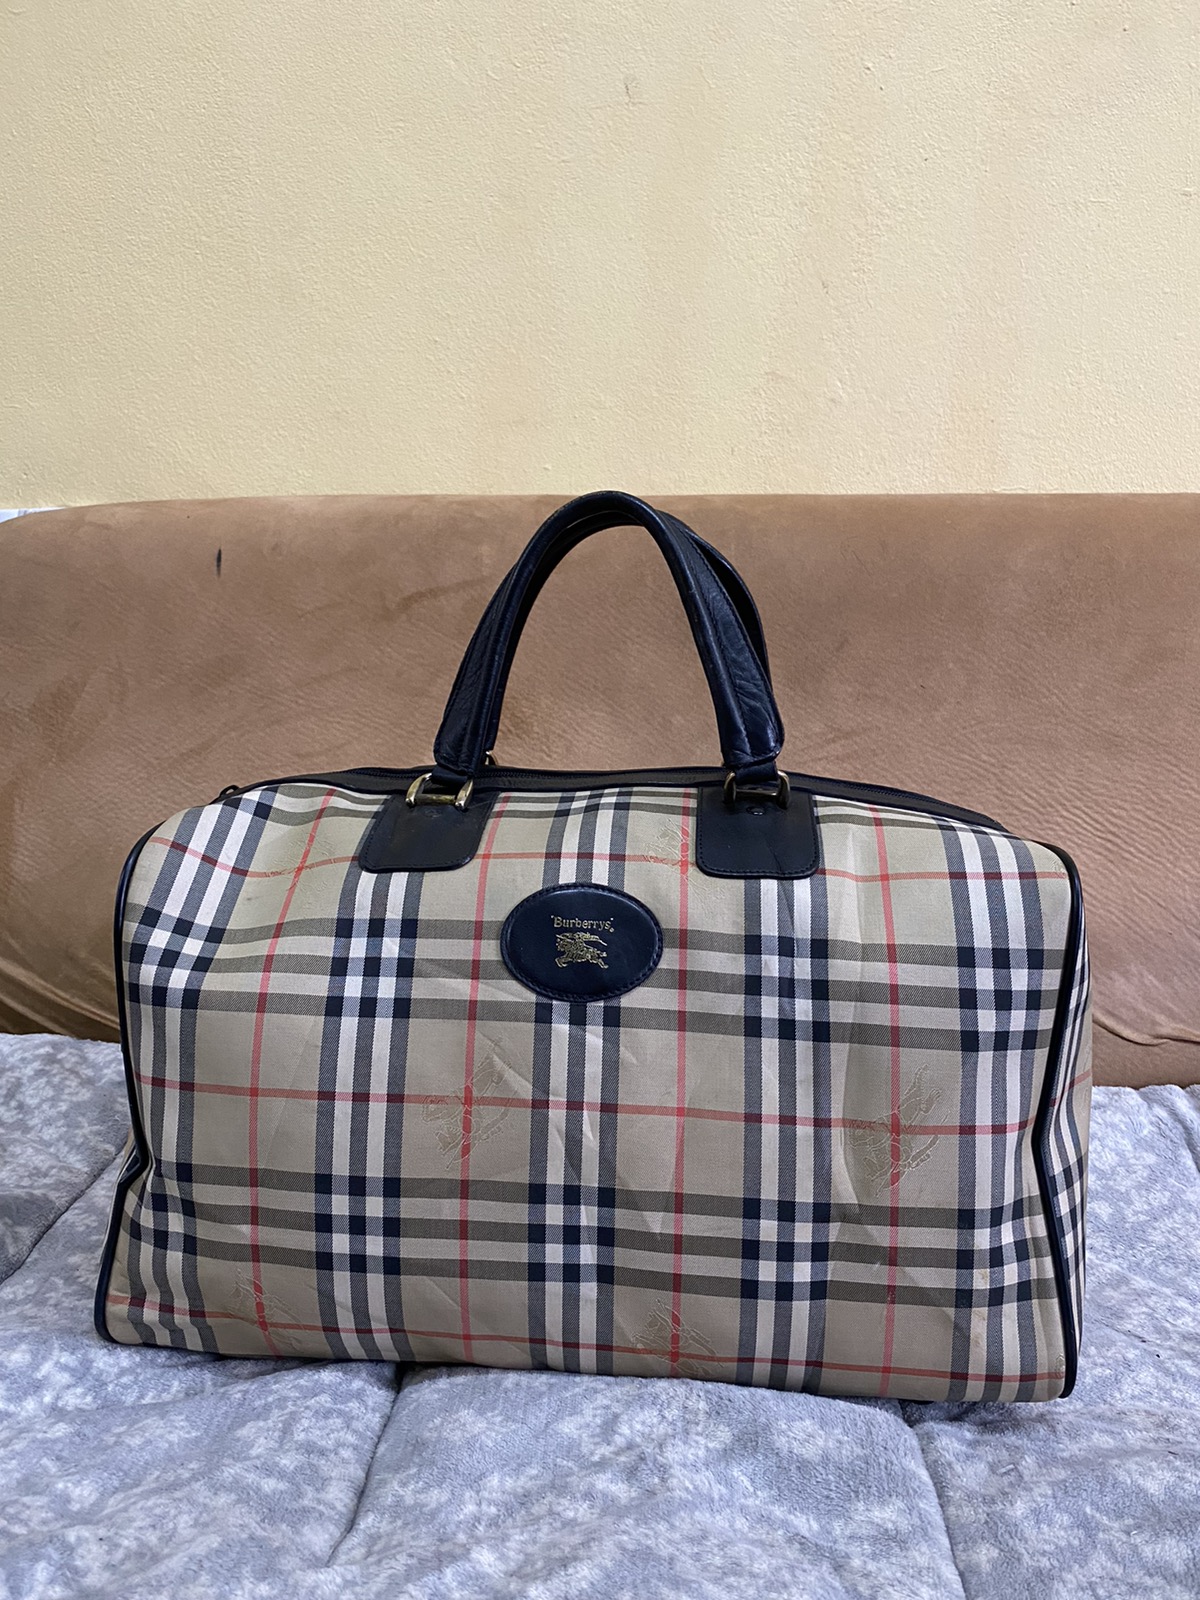 Steals💥 Burberry Leather Travel Bag - 1